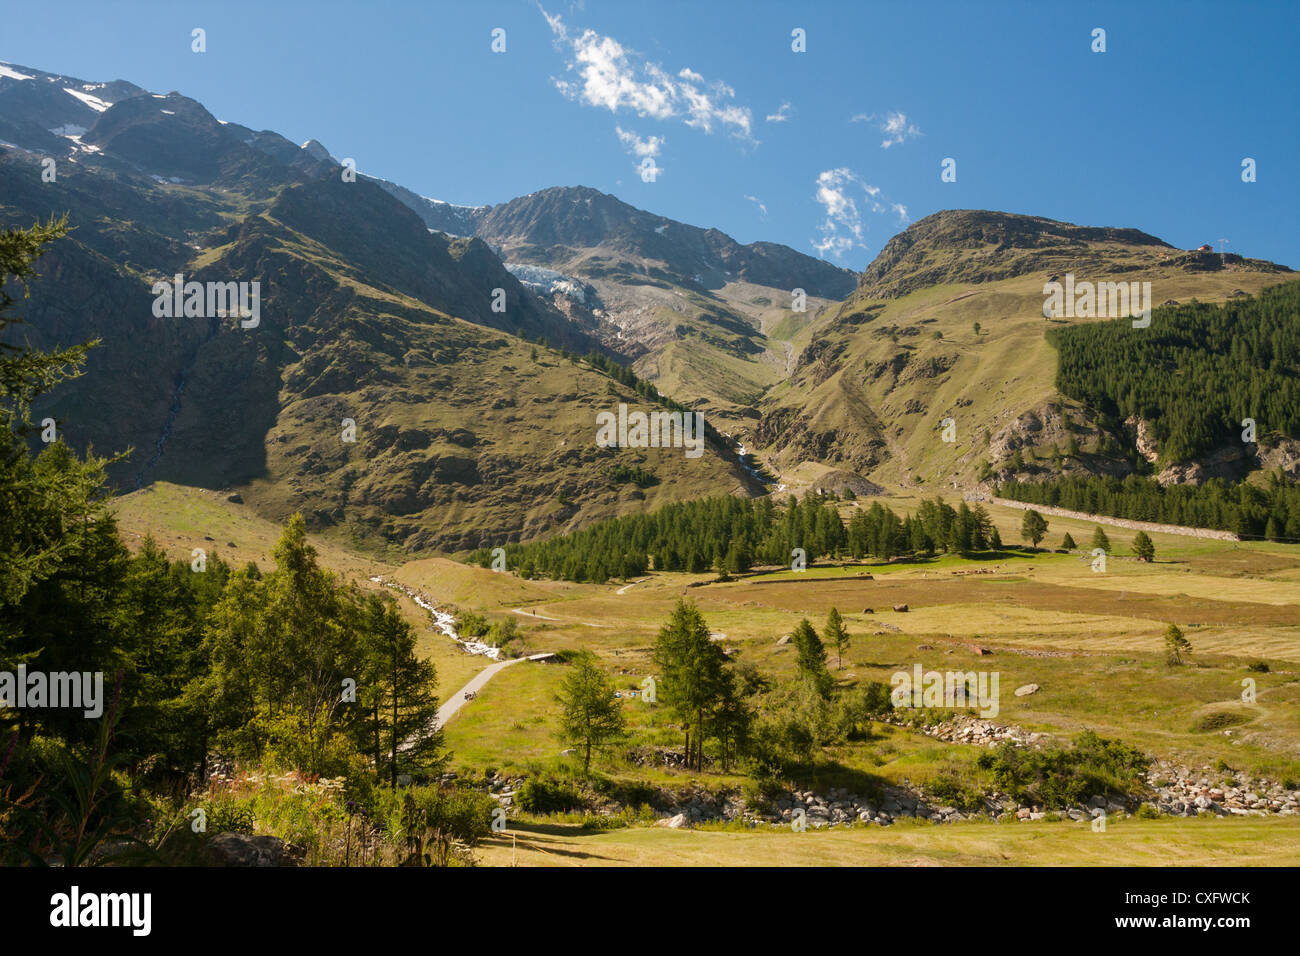 Saas Fee's alpine meadows at the base of it's 4000 metre peaks in the Alps. Stock Photo